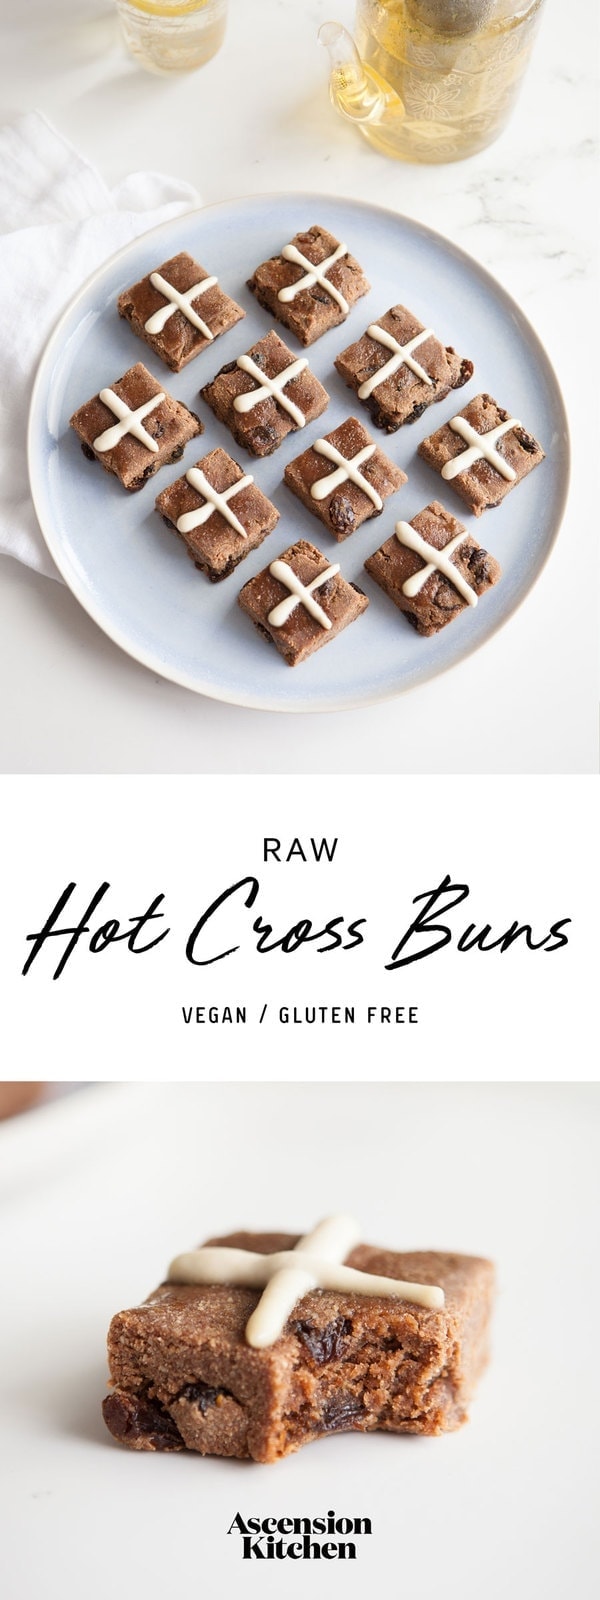 Raw Hot Cross Buns! Naturally gluten free. #HotCrossBuns #VeganHotCrossBuns #GlutenFeeHotCrossBuns #VeganEaster #RawHotCrossBuns #AscensionKitchen   // Pin to your own inspiration board! //